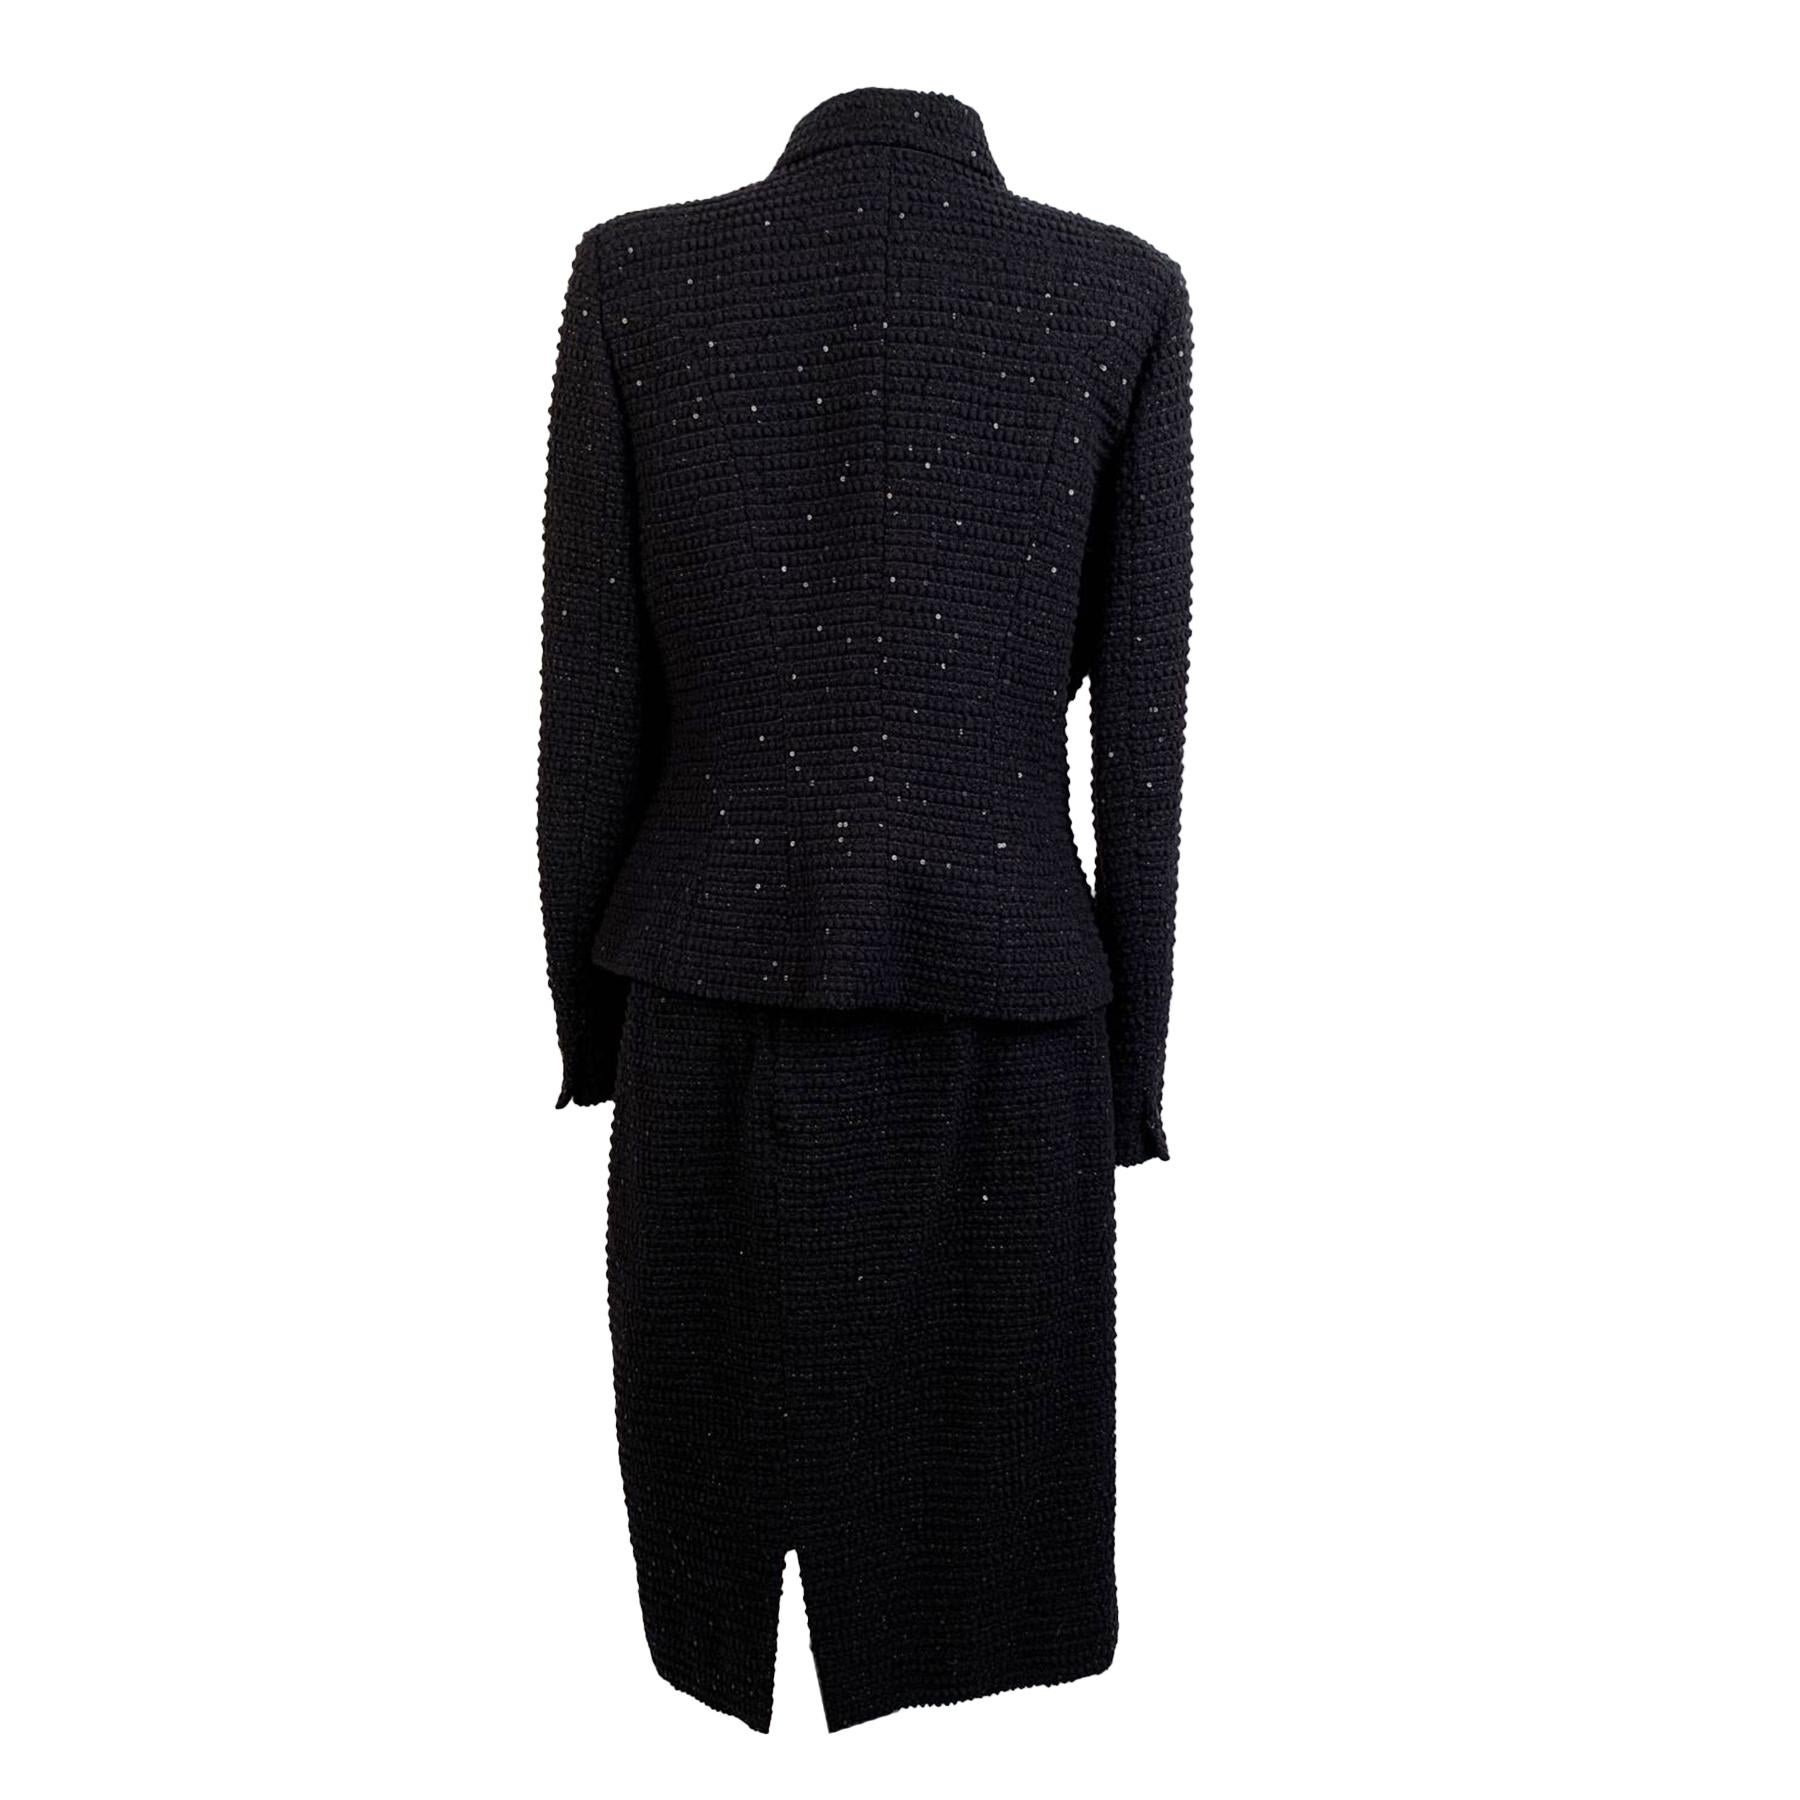 Les Copains vintage black wool skirt suit with an all over sequin embellishment. Composition: 54% virgin wool, 28% rayon, 12% polyester, 6% nylon. The jacket feature front button closure (embellished with rhinestones) and front pocket on the waist.